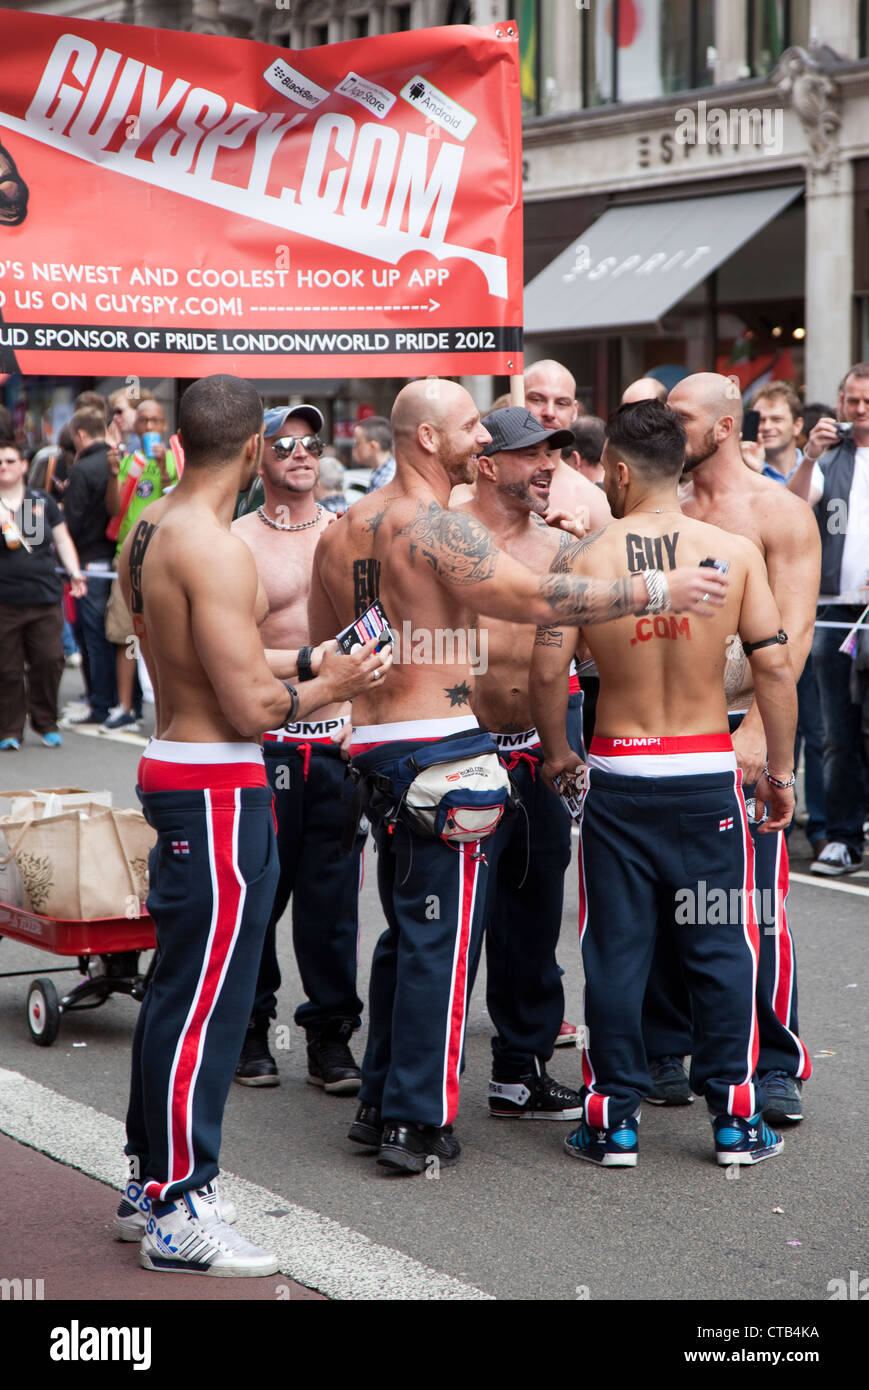 Topless group of men at World Pride in London - 7 July 2012 Stock Photo